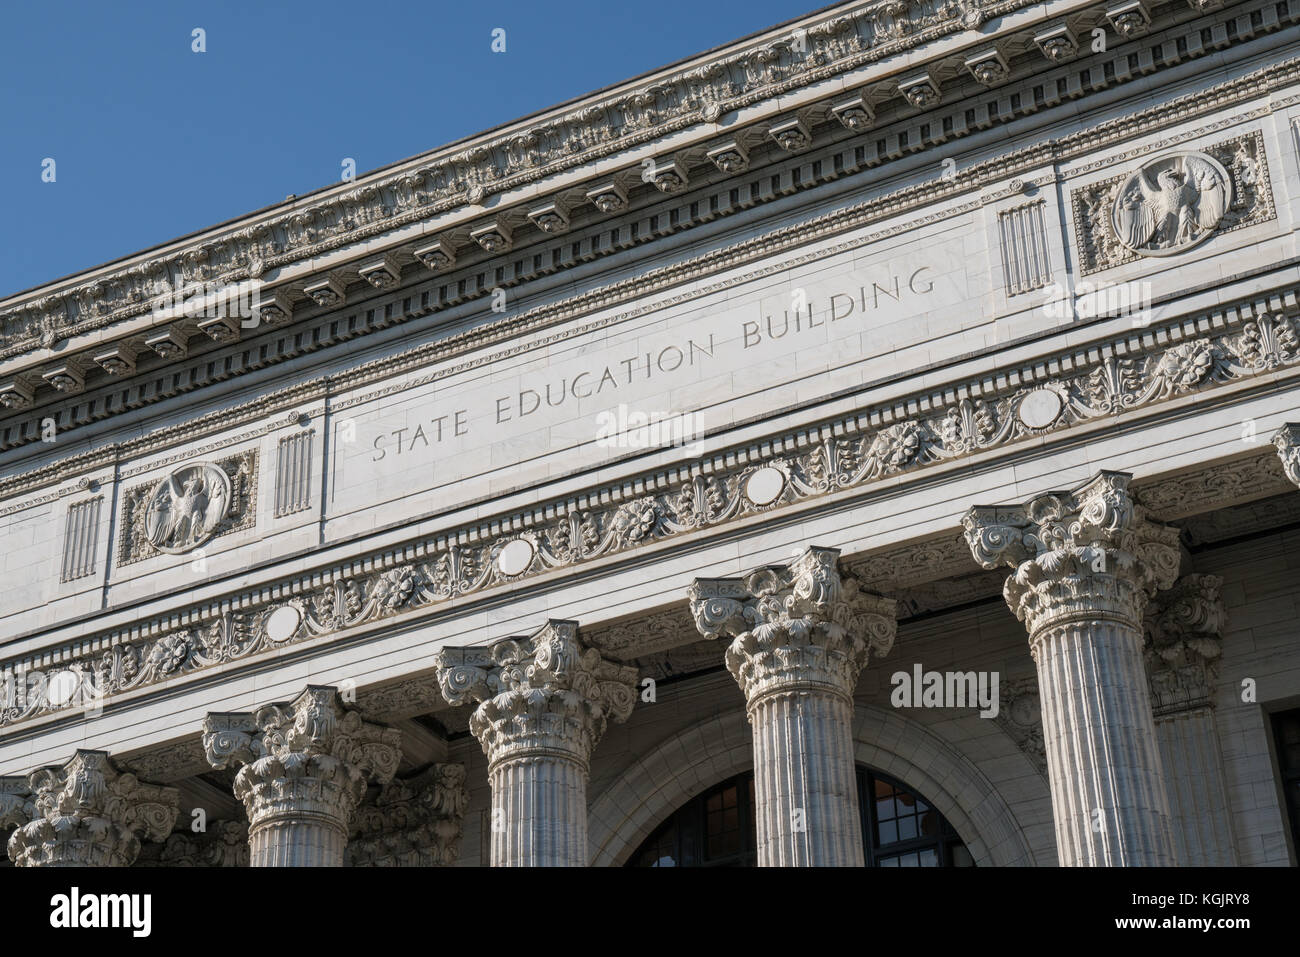 Facade of New York State Education Building in Albany, New York Stock Photo